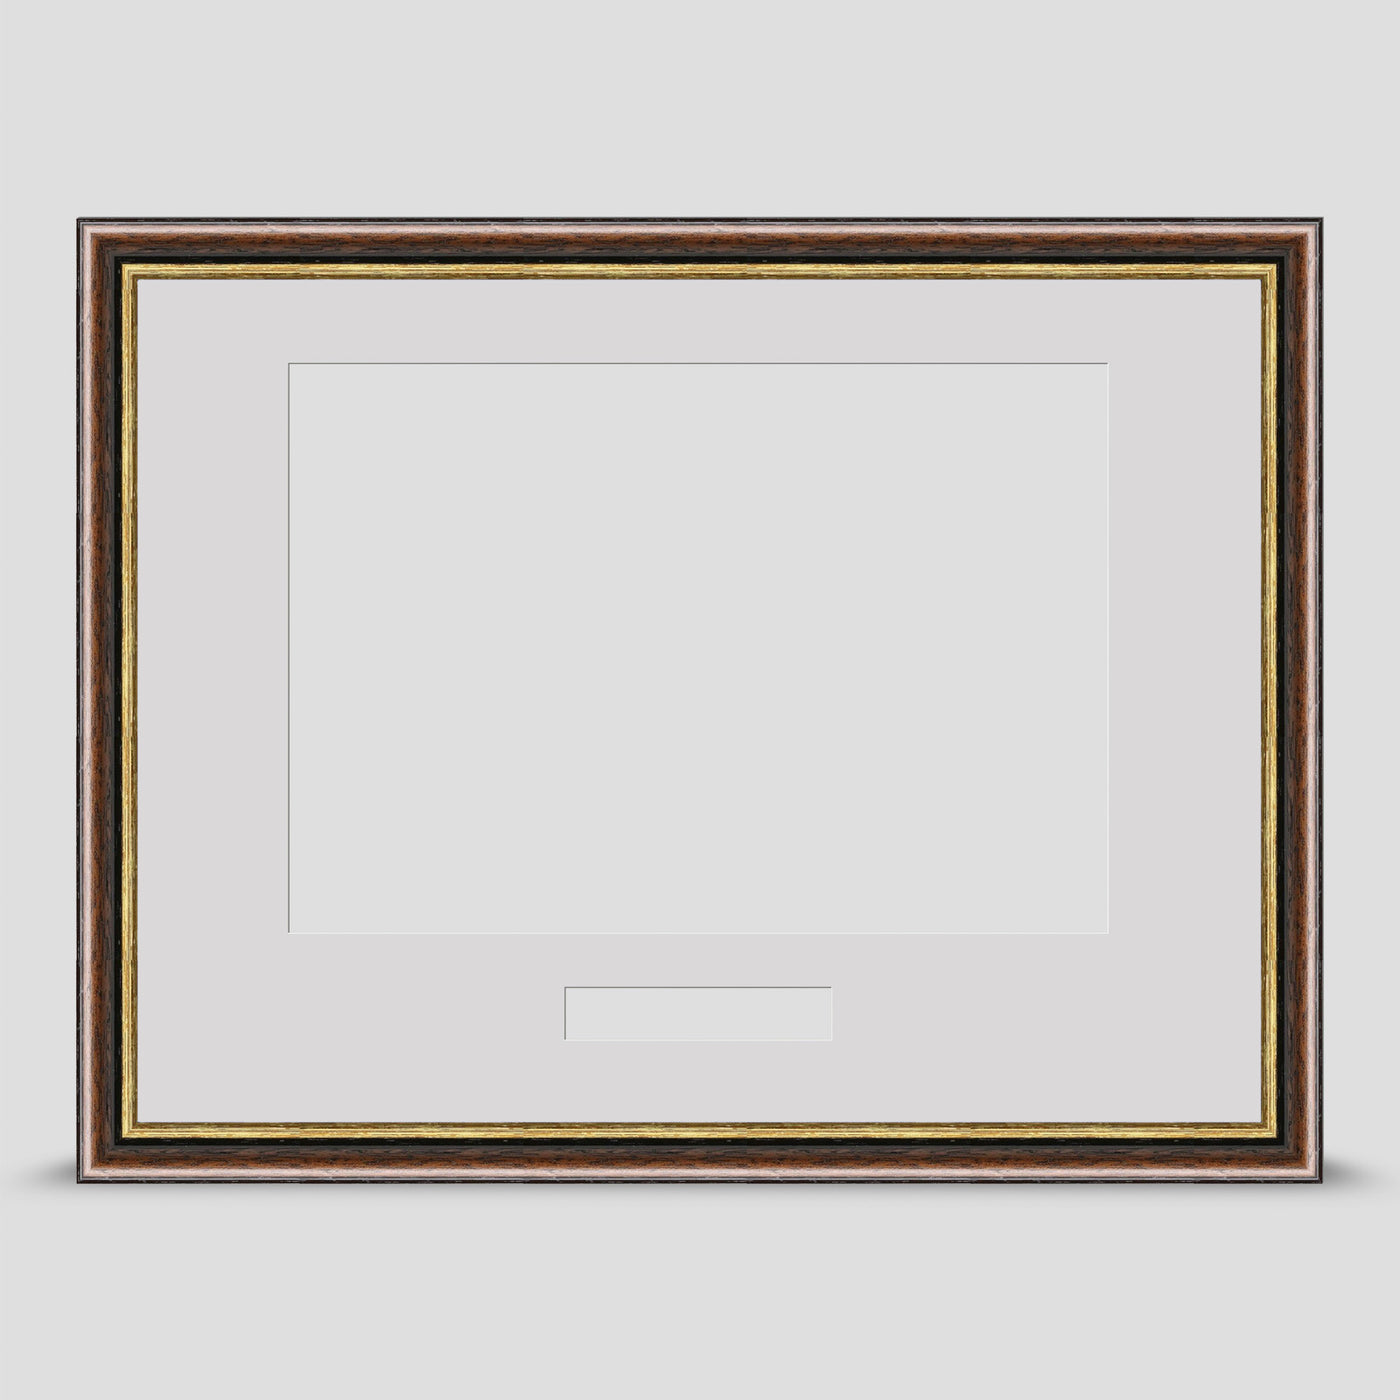 16x12 Brown & Gold Picture Frame Including a A4 Mount with text box - Landscape